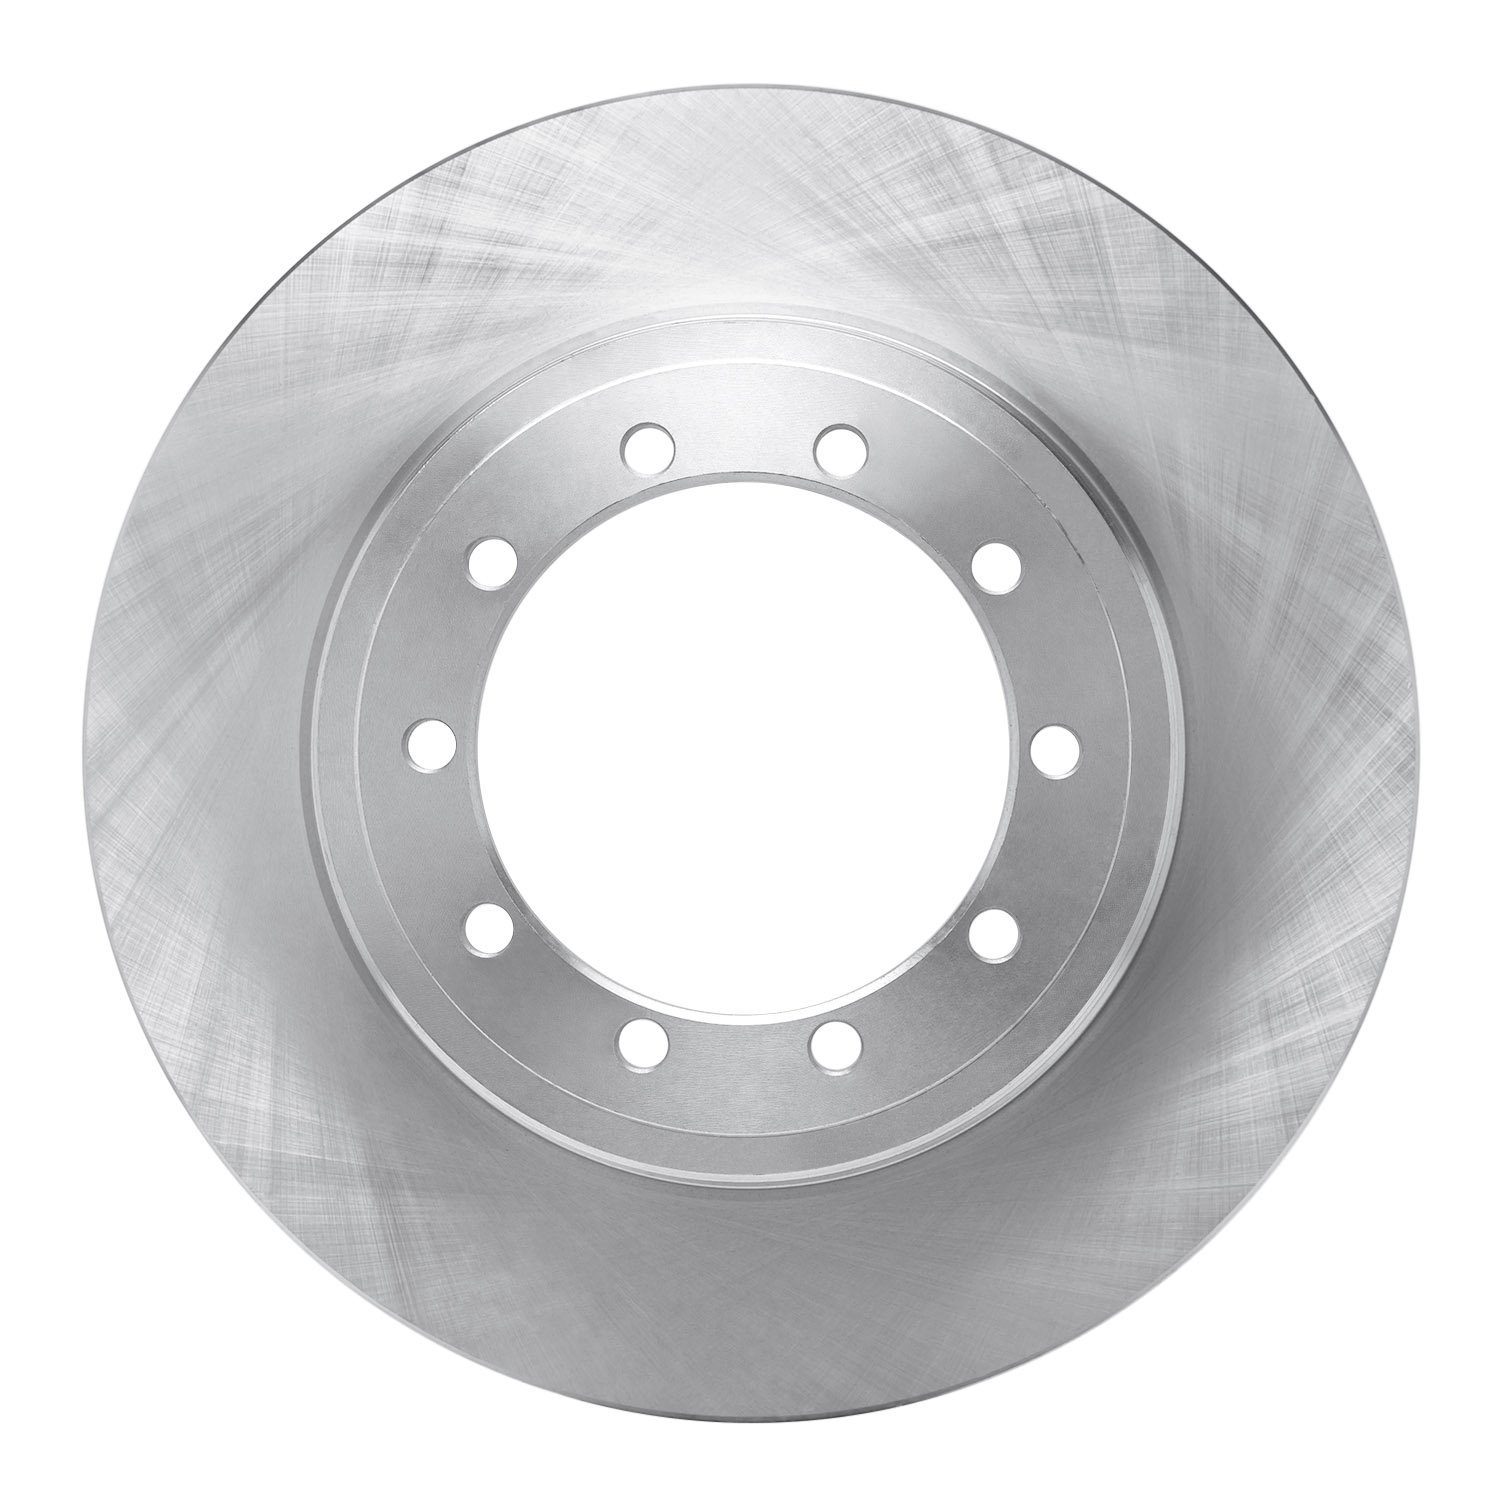 600-54285 Brake Rotor, Fits Select Ford/Lincoln/Mercury/Mazda, Position: Front,Fr